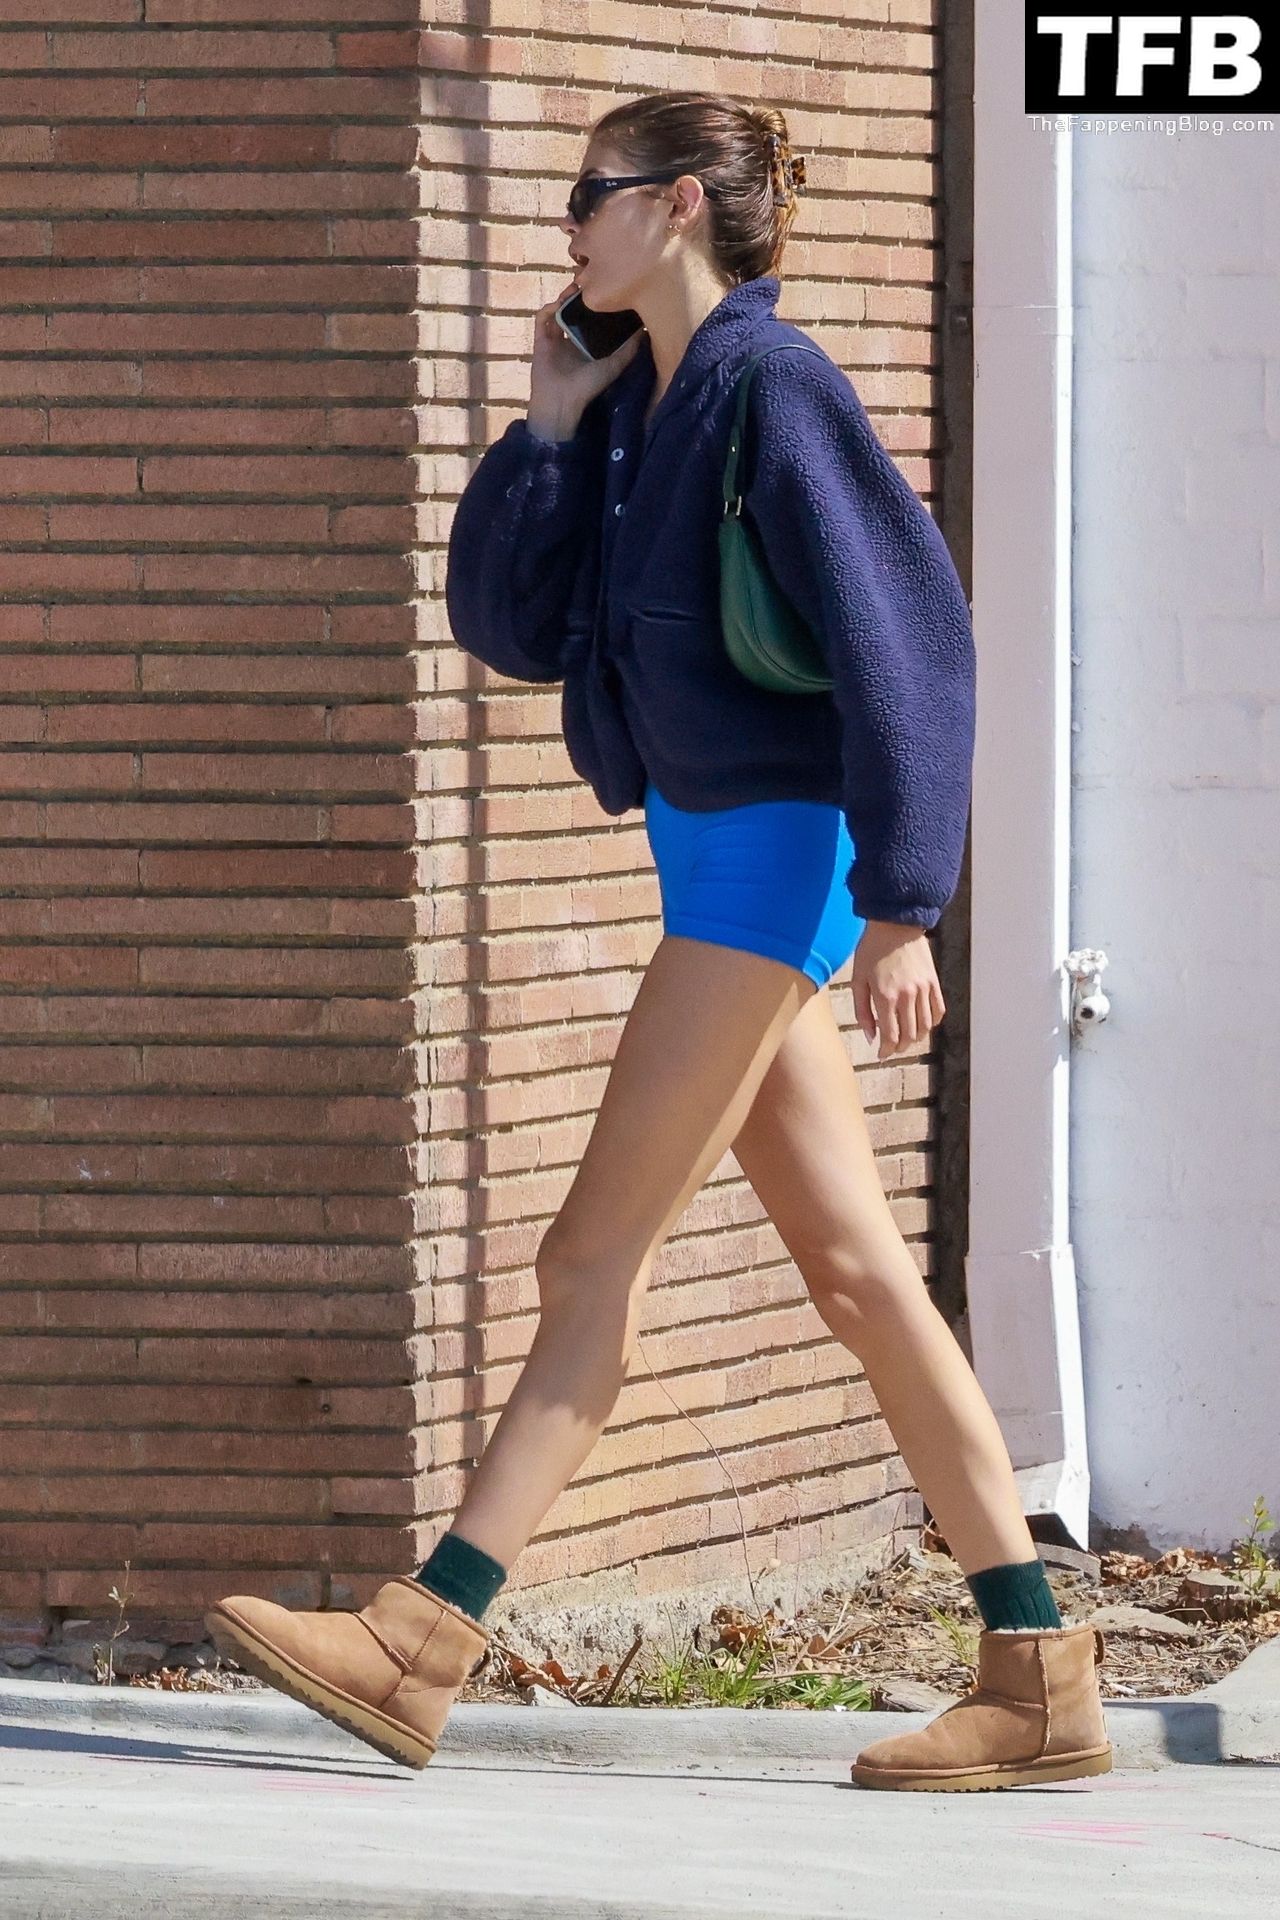 Kaia Gerber Sexy The Fappening Blog 16 - Kaia Gerber Shows Off Her Toned Legs at a Medical Building (23 Photos)